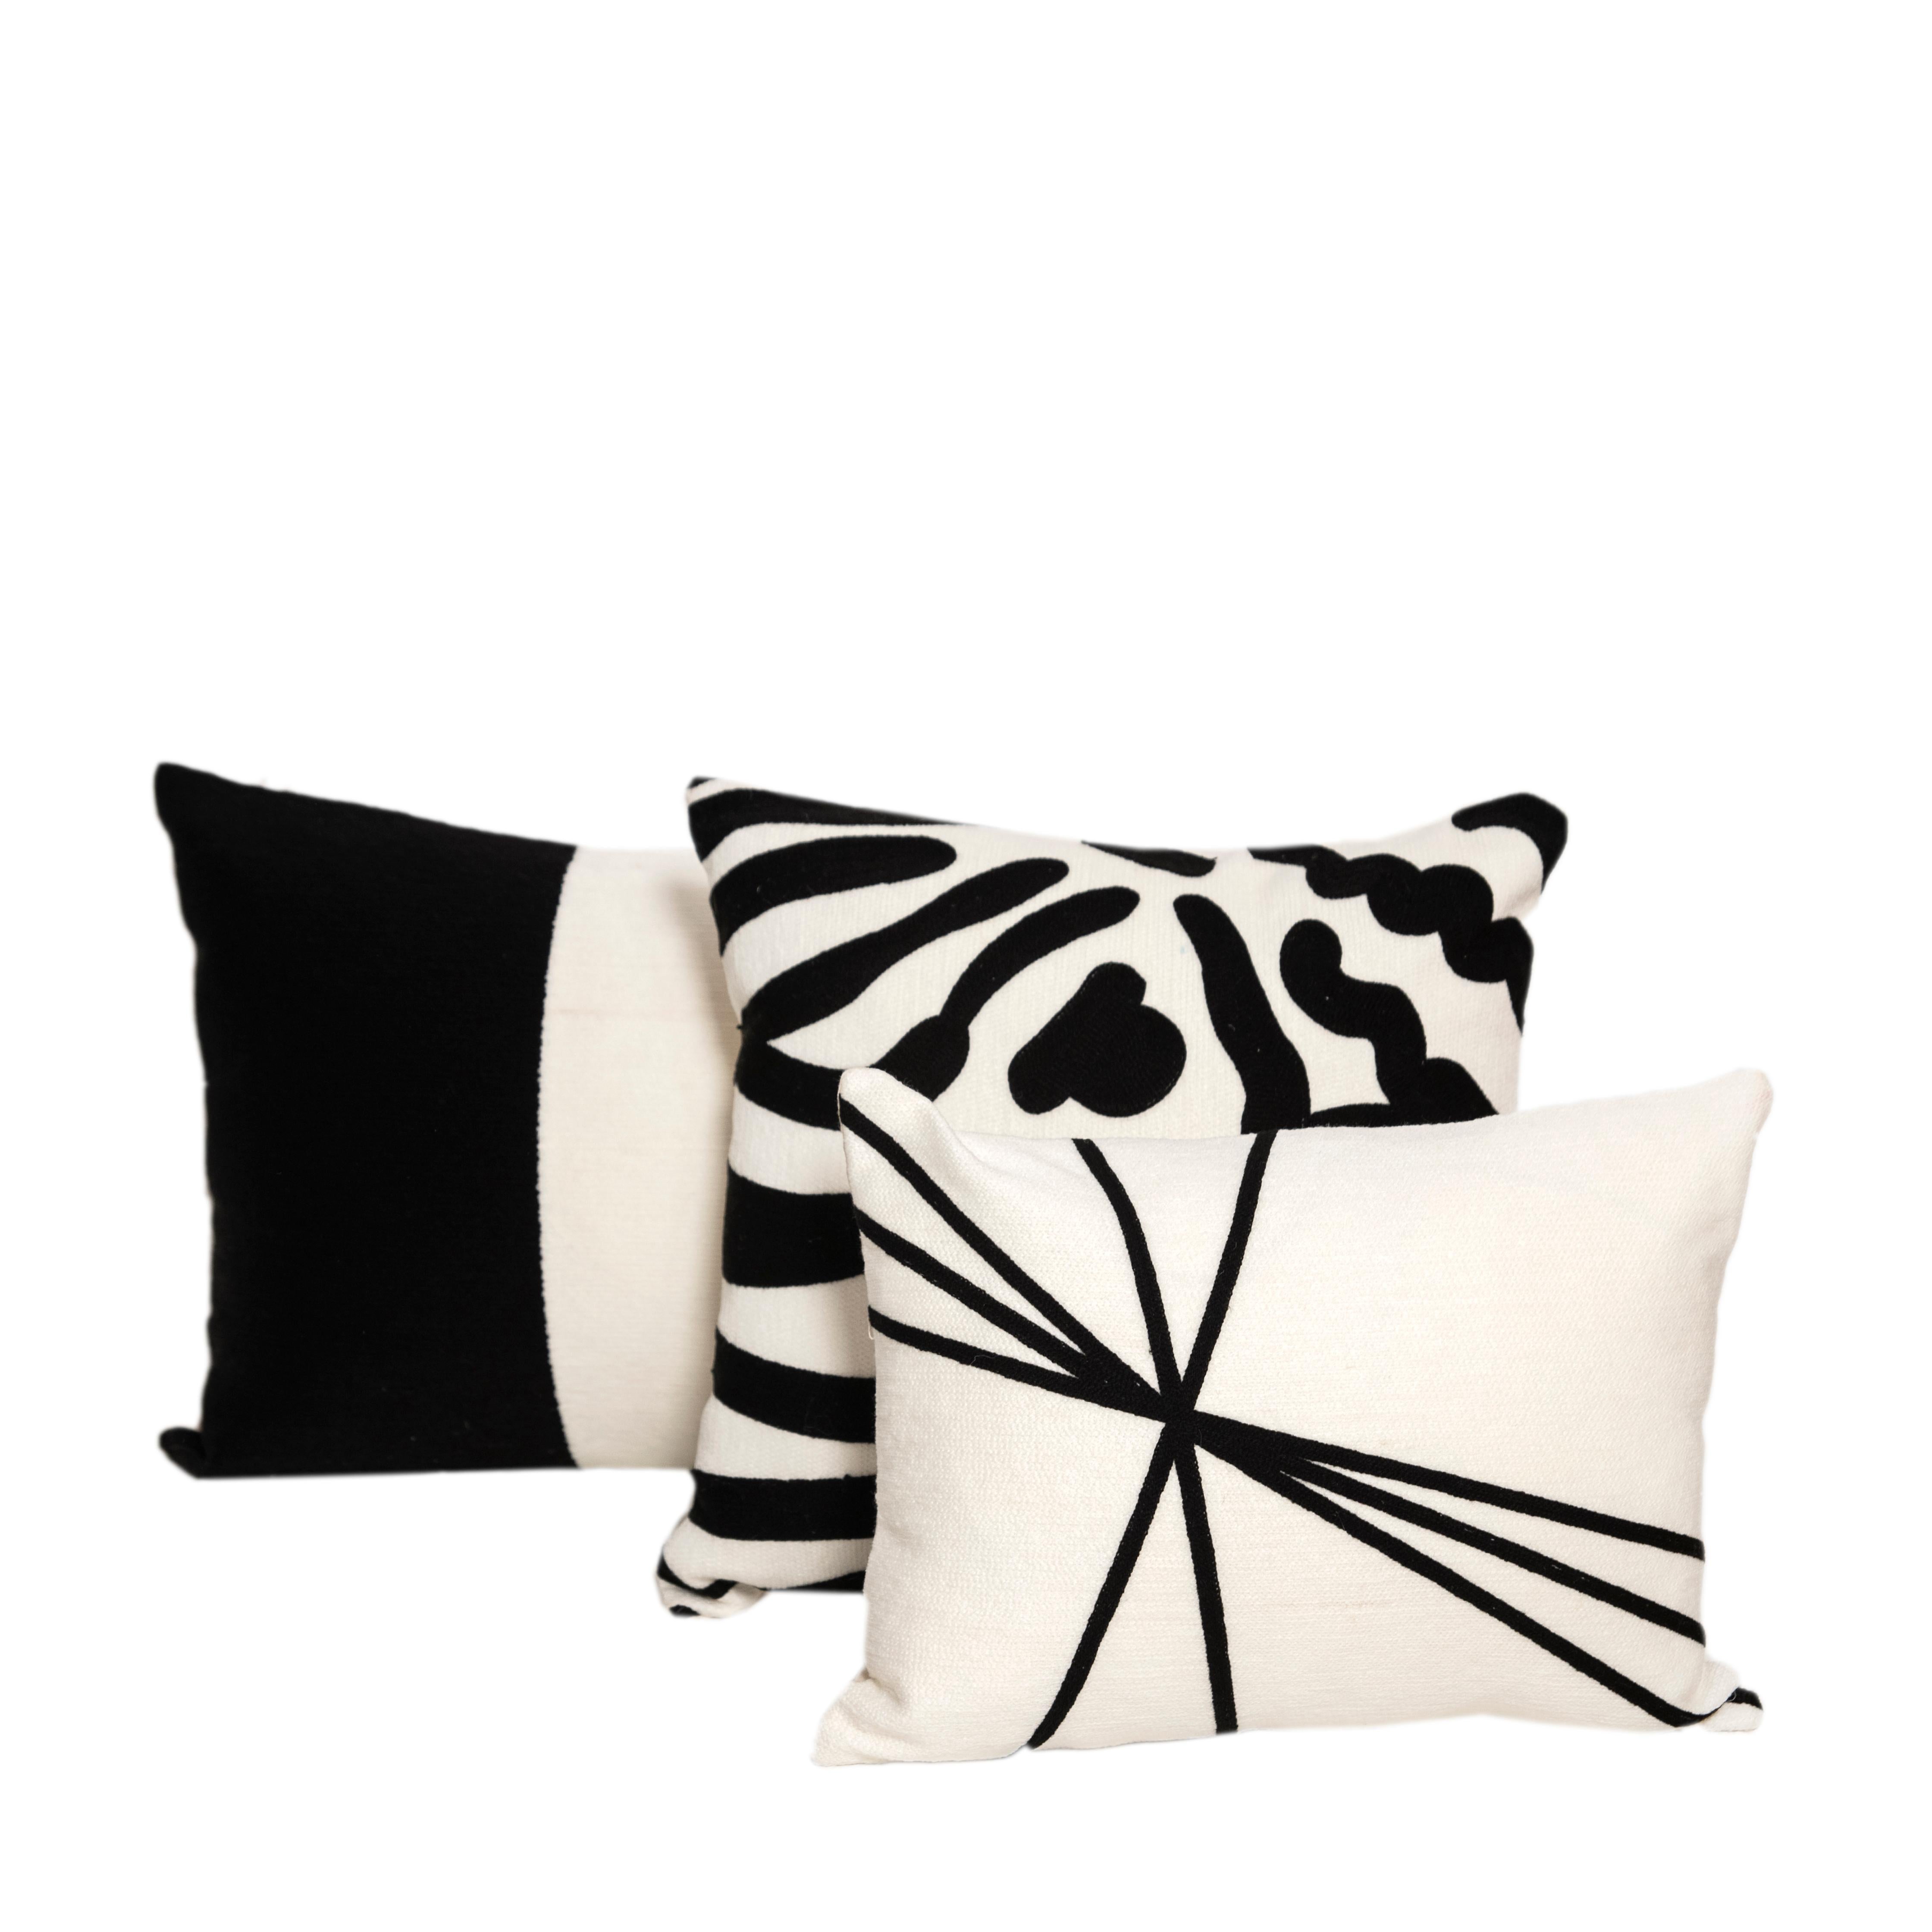 Embroidered Contemporary Modern Embroidery Pillow Cushion Cotton Animal print Black white For Sale